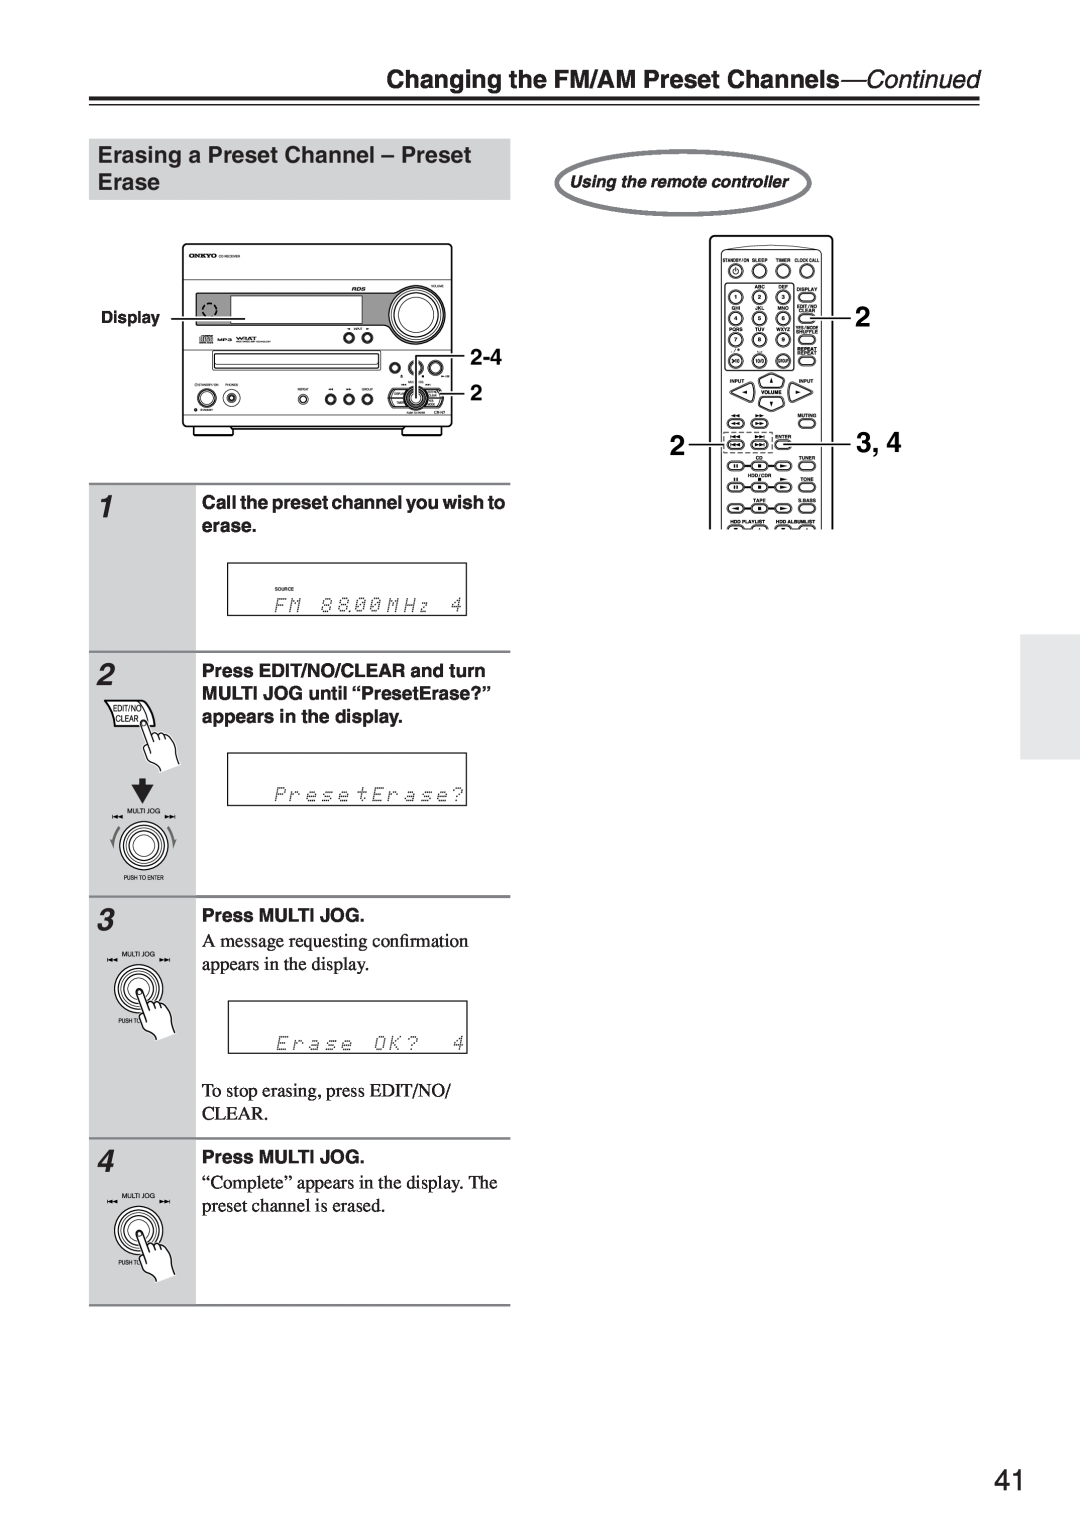 Onkyo CR-N7 instruction manual Changing the FM/AM Preset Channels-Continued, Erasing a Preset Channel - Preset, Erase, 2-4 